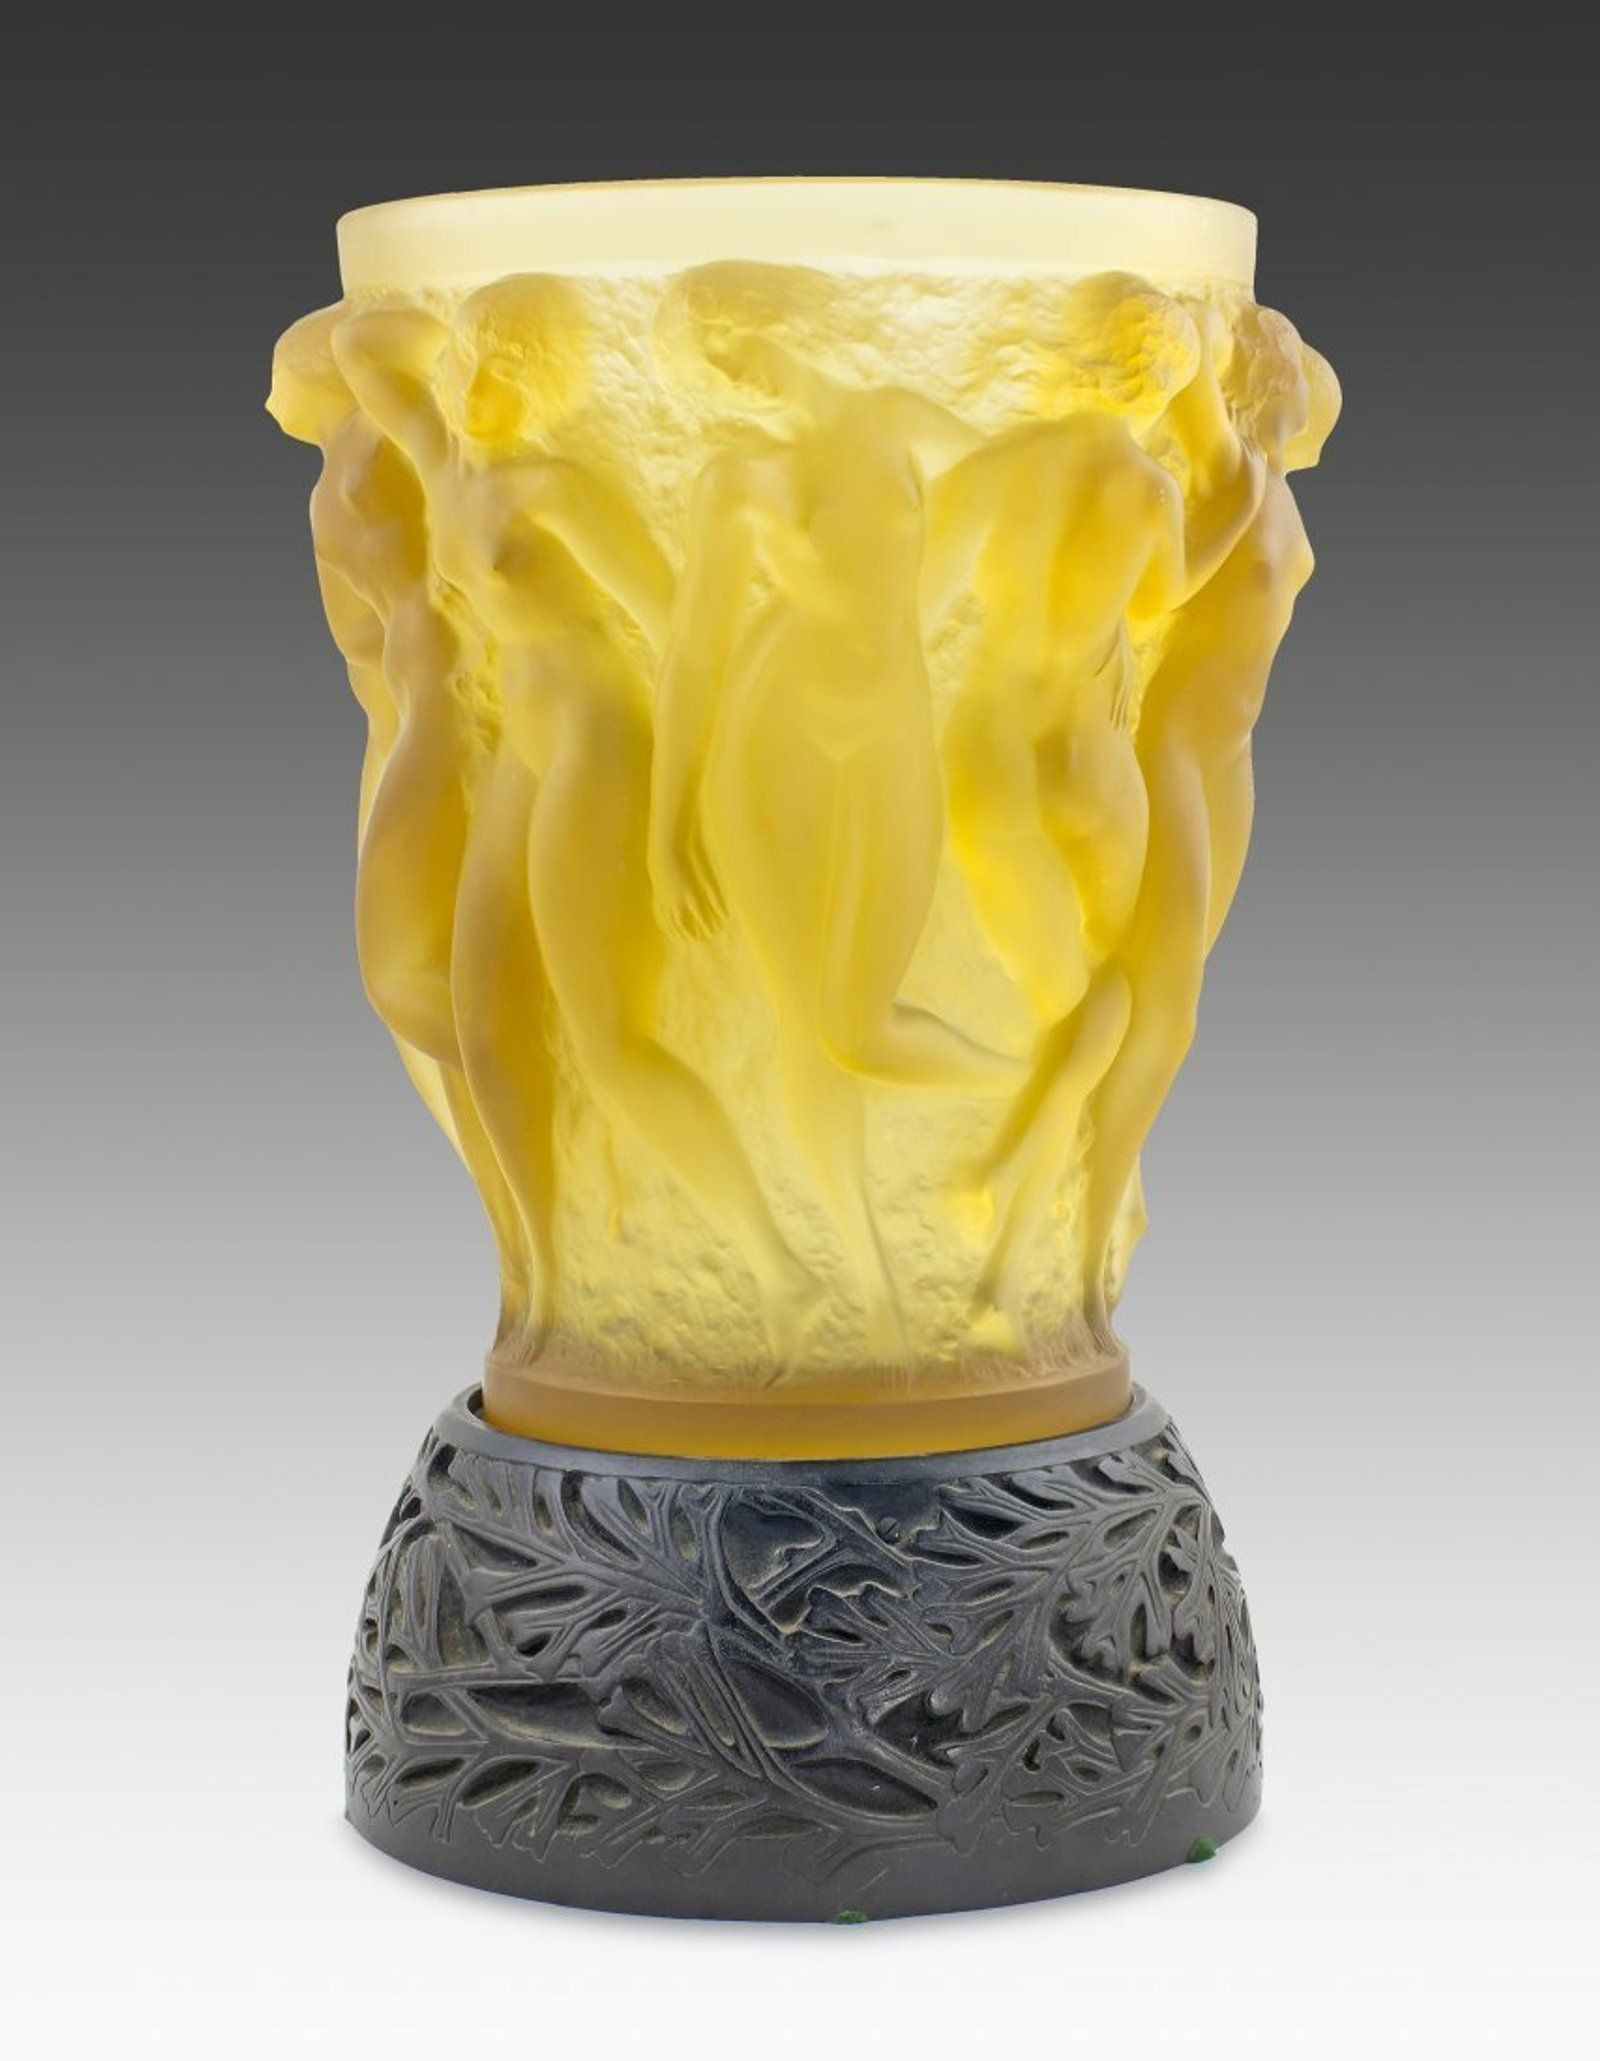 20 attractive Vase Lalique Les Bacchantes 2024 free download vase lalique les bacchantes of rene lalique bacchantes a yellow glass vase mounted on a self throughout rene lalique bacchantes a yellow glass vase mounted on a self illuminating bronze base